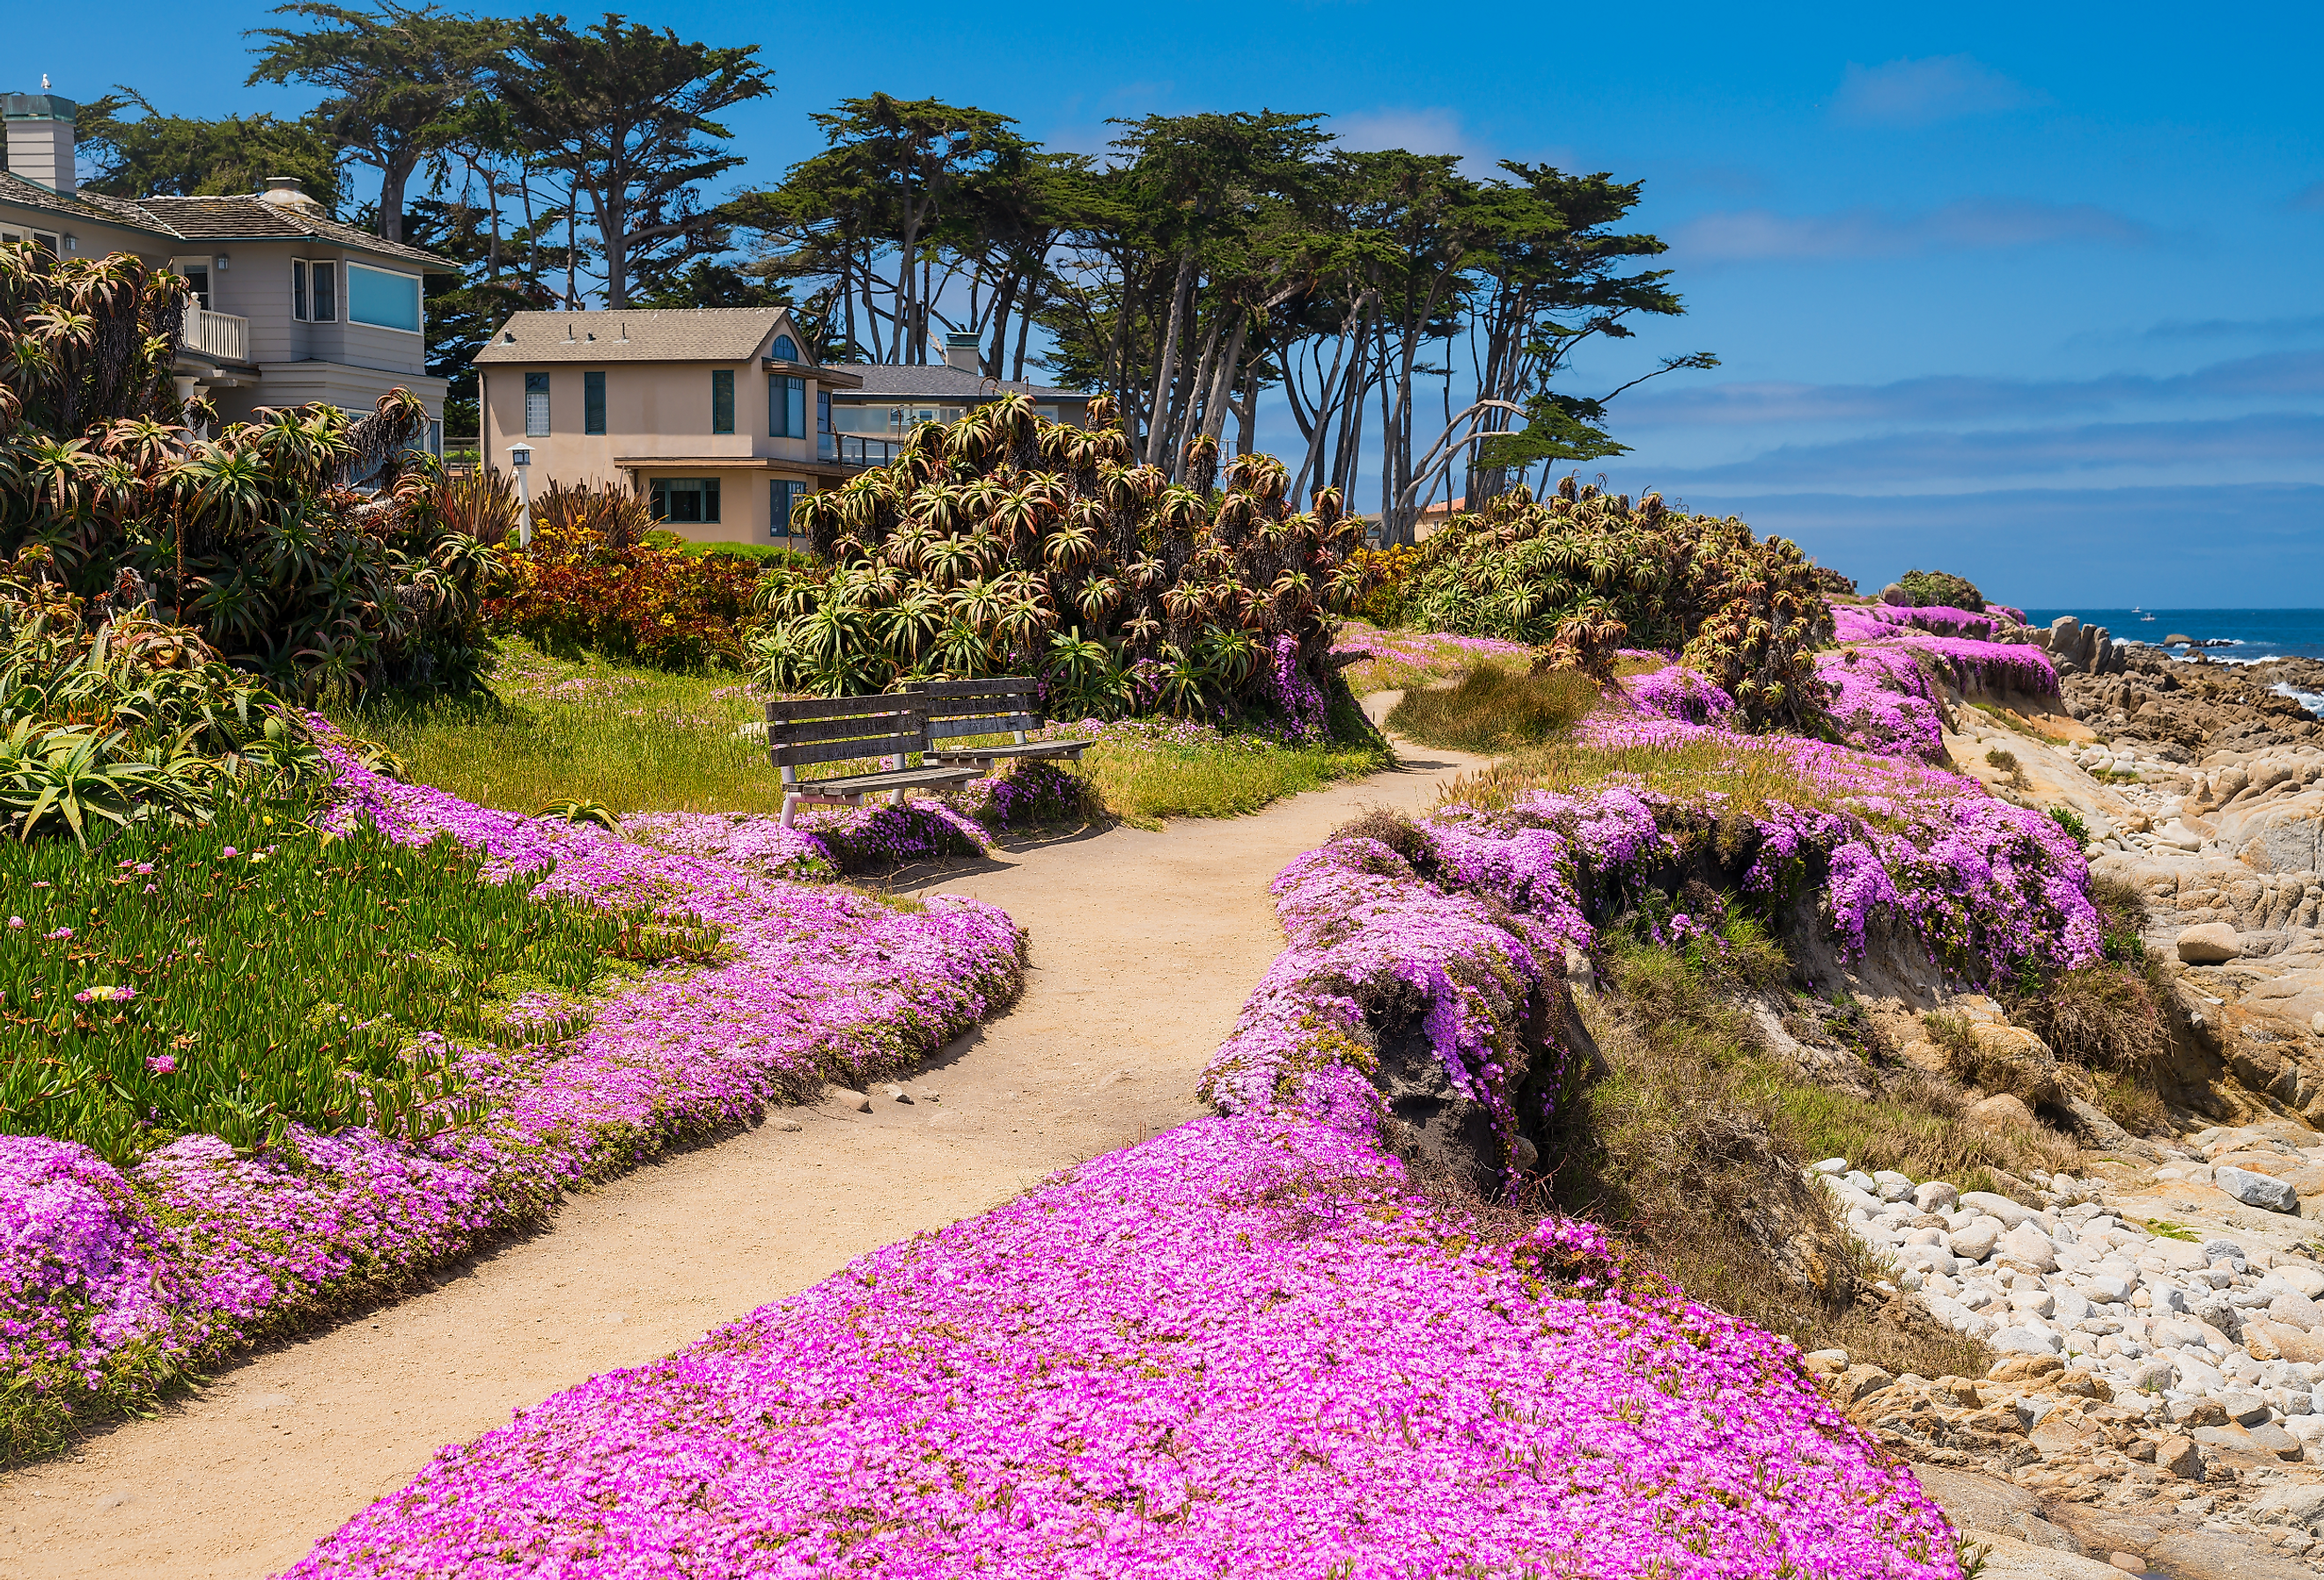 Homes and pathway through pink flowers in Pacific Grove, Monterey, California.